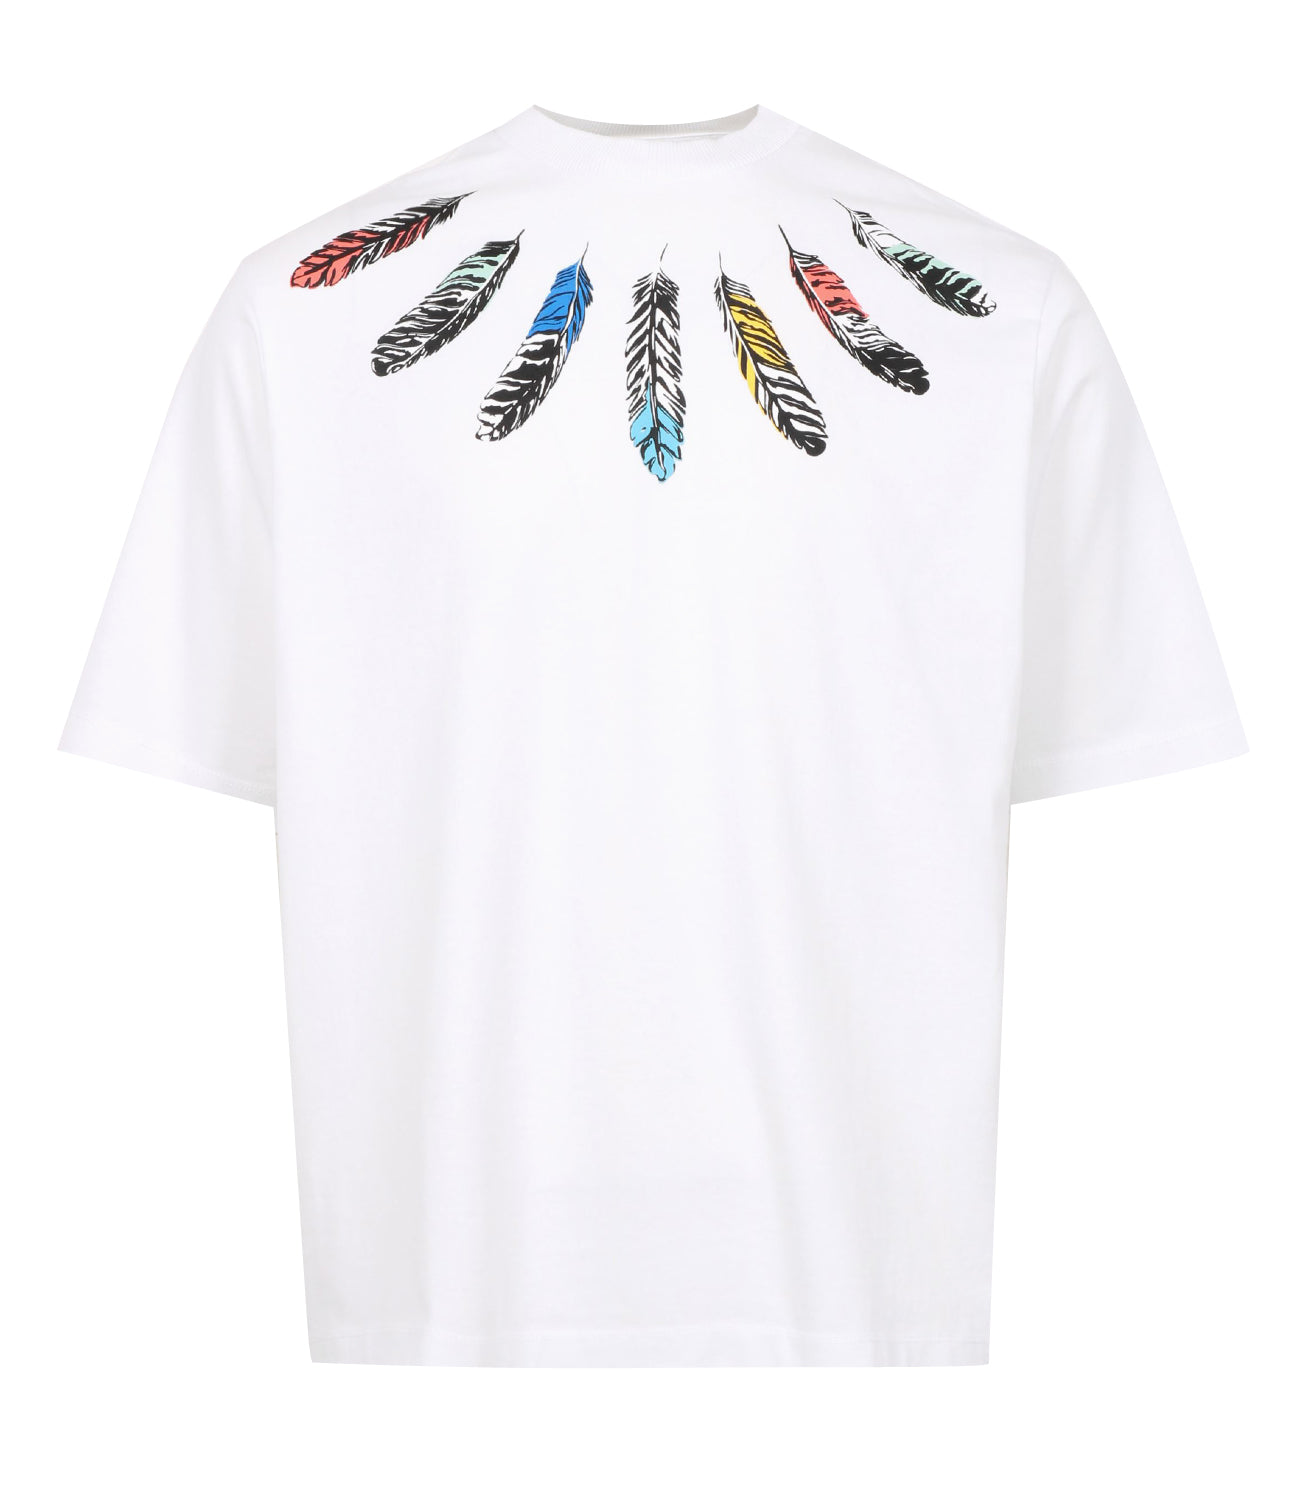 Marcelo Burlon | T-Shirt Collar Feathers White and Grey